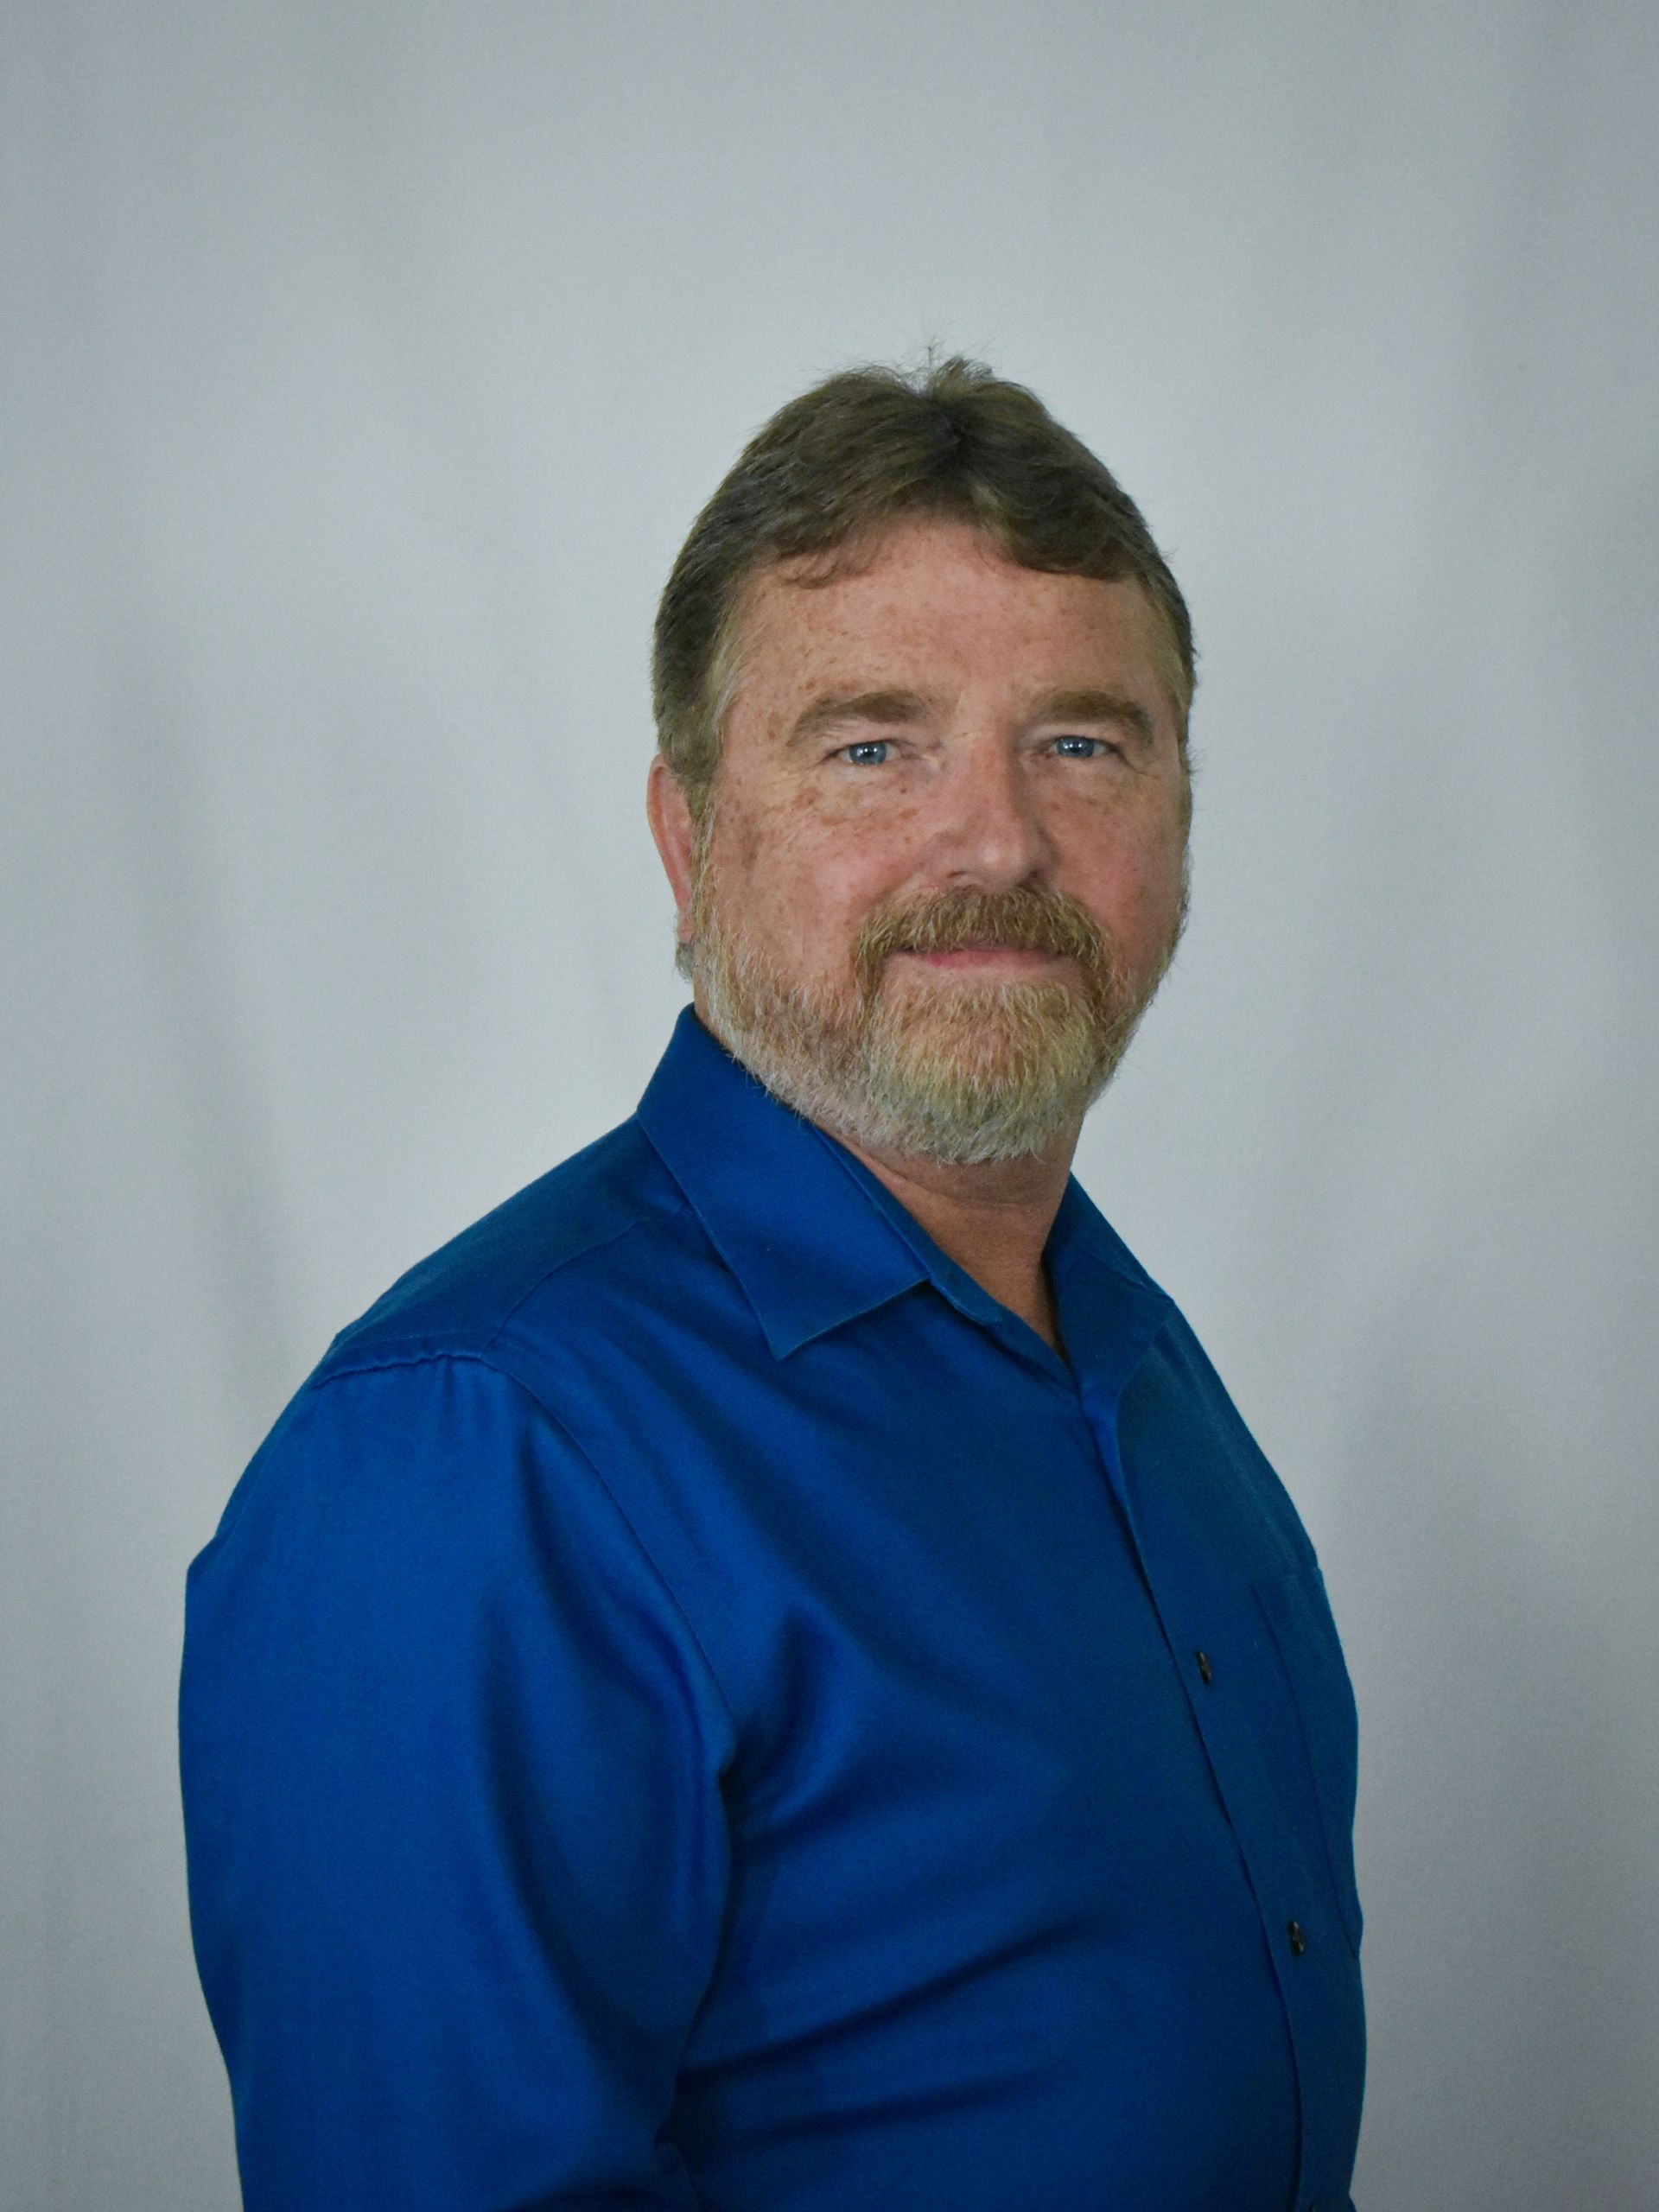 A middle-aged white man with brown hair and a gray beard wearing a blue shirt, white background